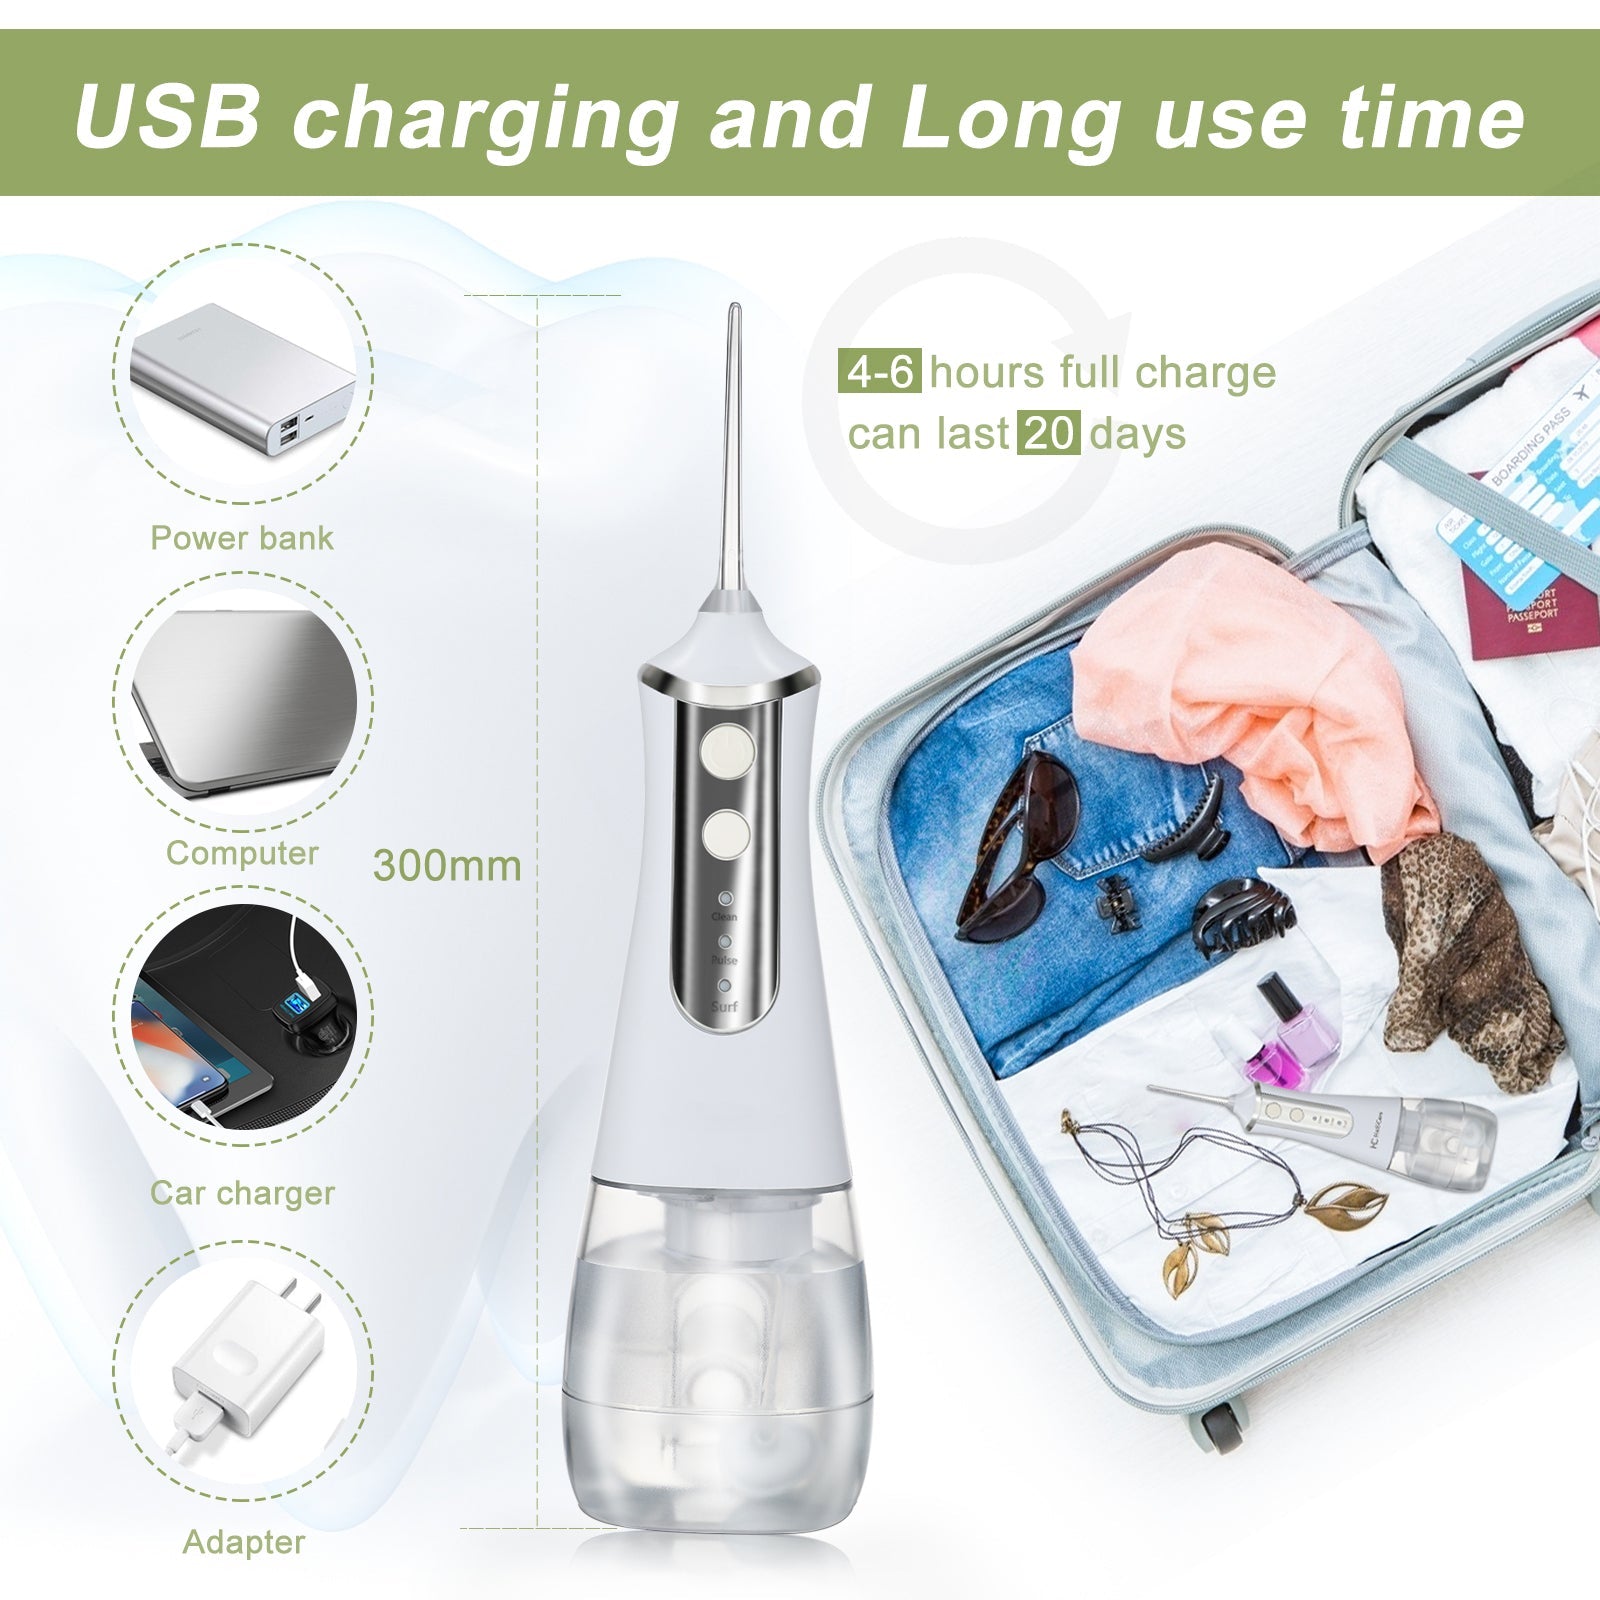 Oral Irrigator USB Rechargeable Water Floss. Portable Dental Water Flosser Jet 350ml. Irrigator Dental Teeth Cleaner 5 Jet